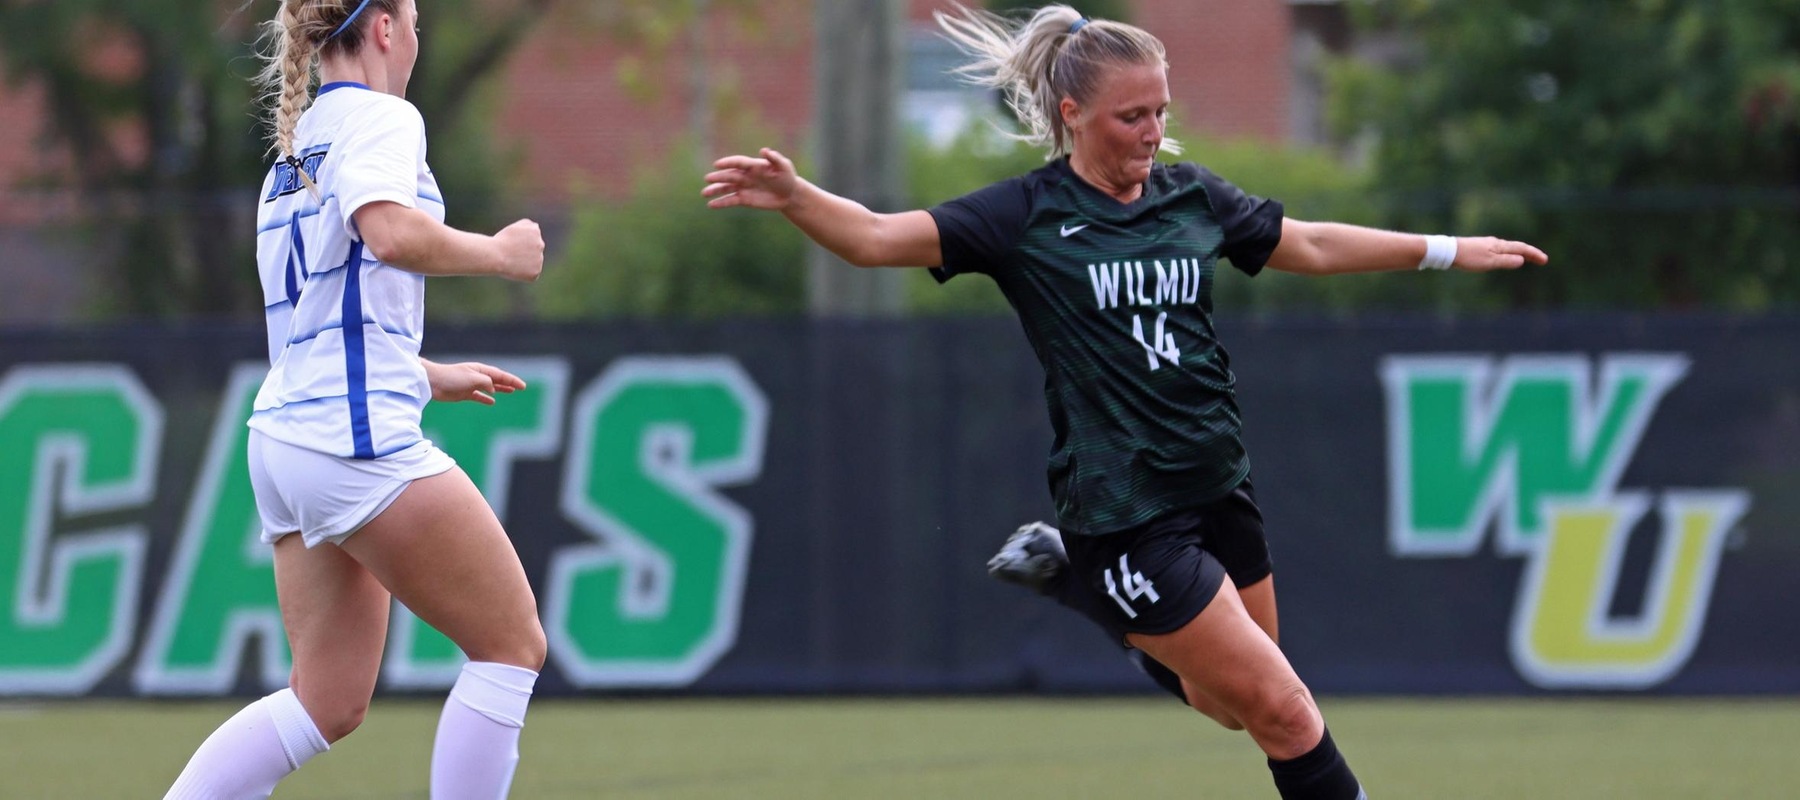 Photo of Lauren Hoelke who scored the second goal of the game. Copyright 2021; Wilmington University. All rights reserved. Photo by Trudy Spence.